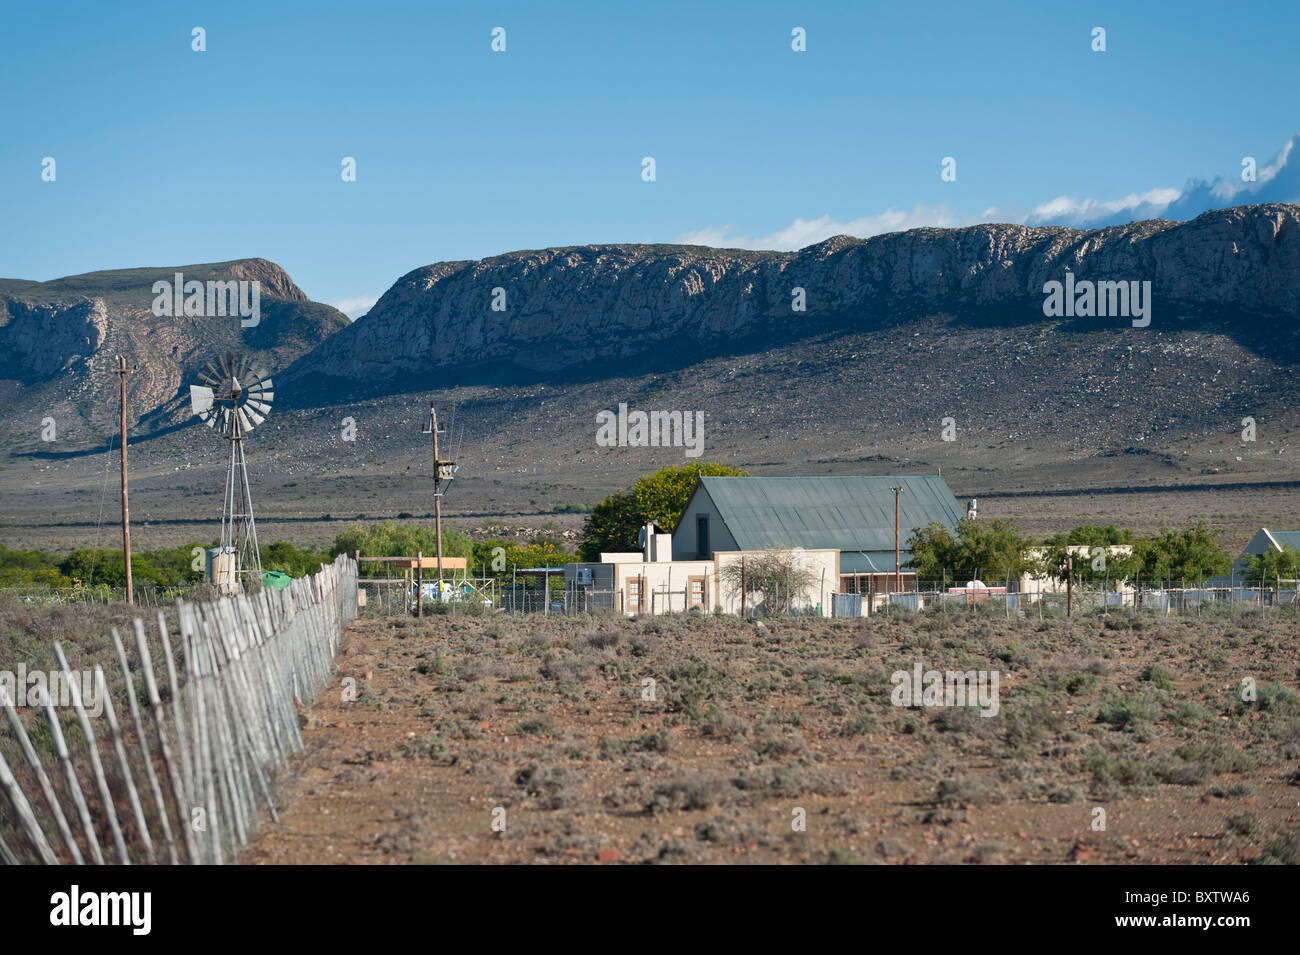 A Small Farming Settlement near Klaarstroom in the Swartberg Mountains, Karoo, South Africa Stock Photo